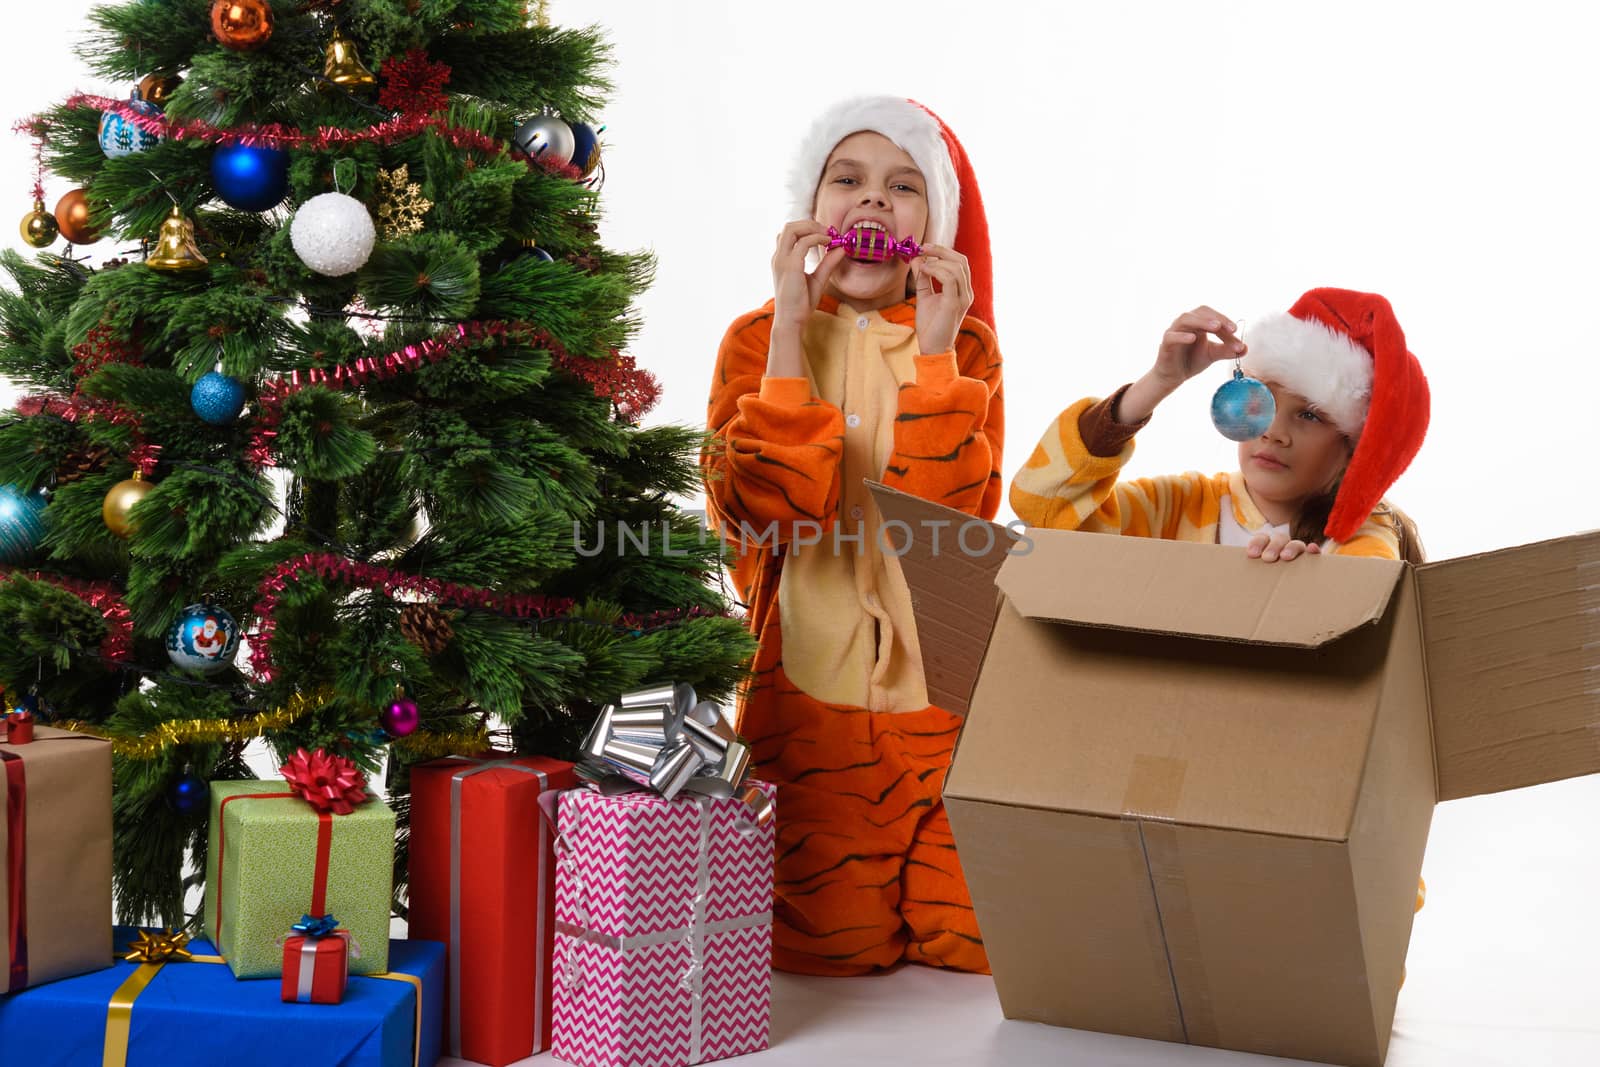 Two girls fooling around and looking at Christmas toys